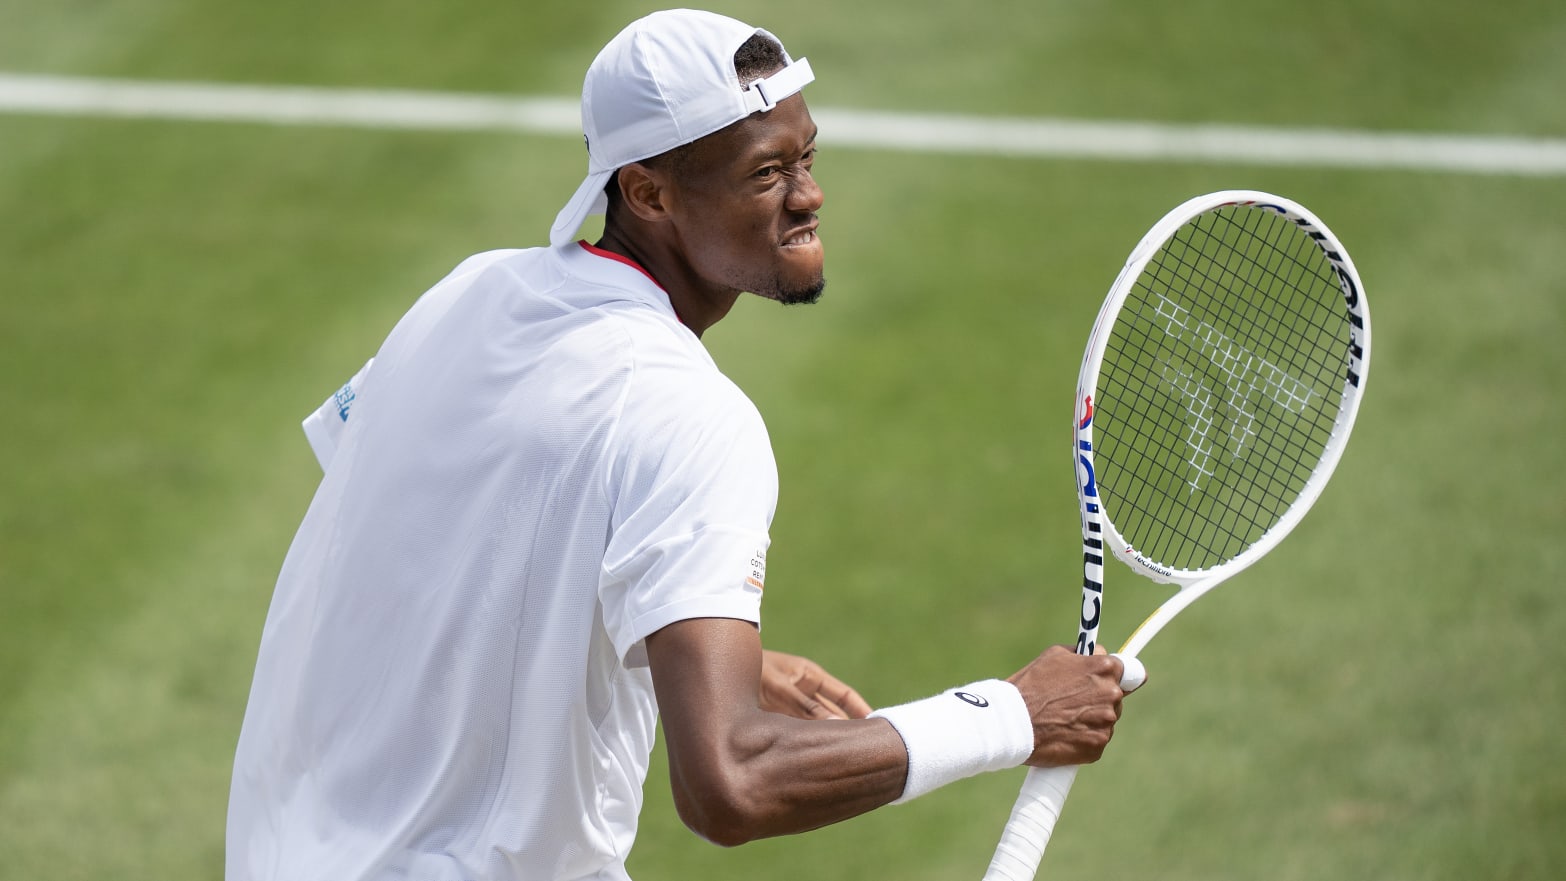 Everything to Know About Chris Eubanks—Wimbledons U.S